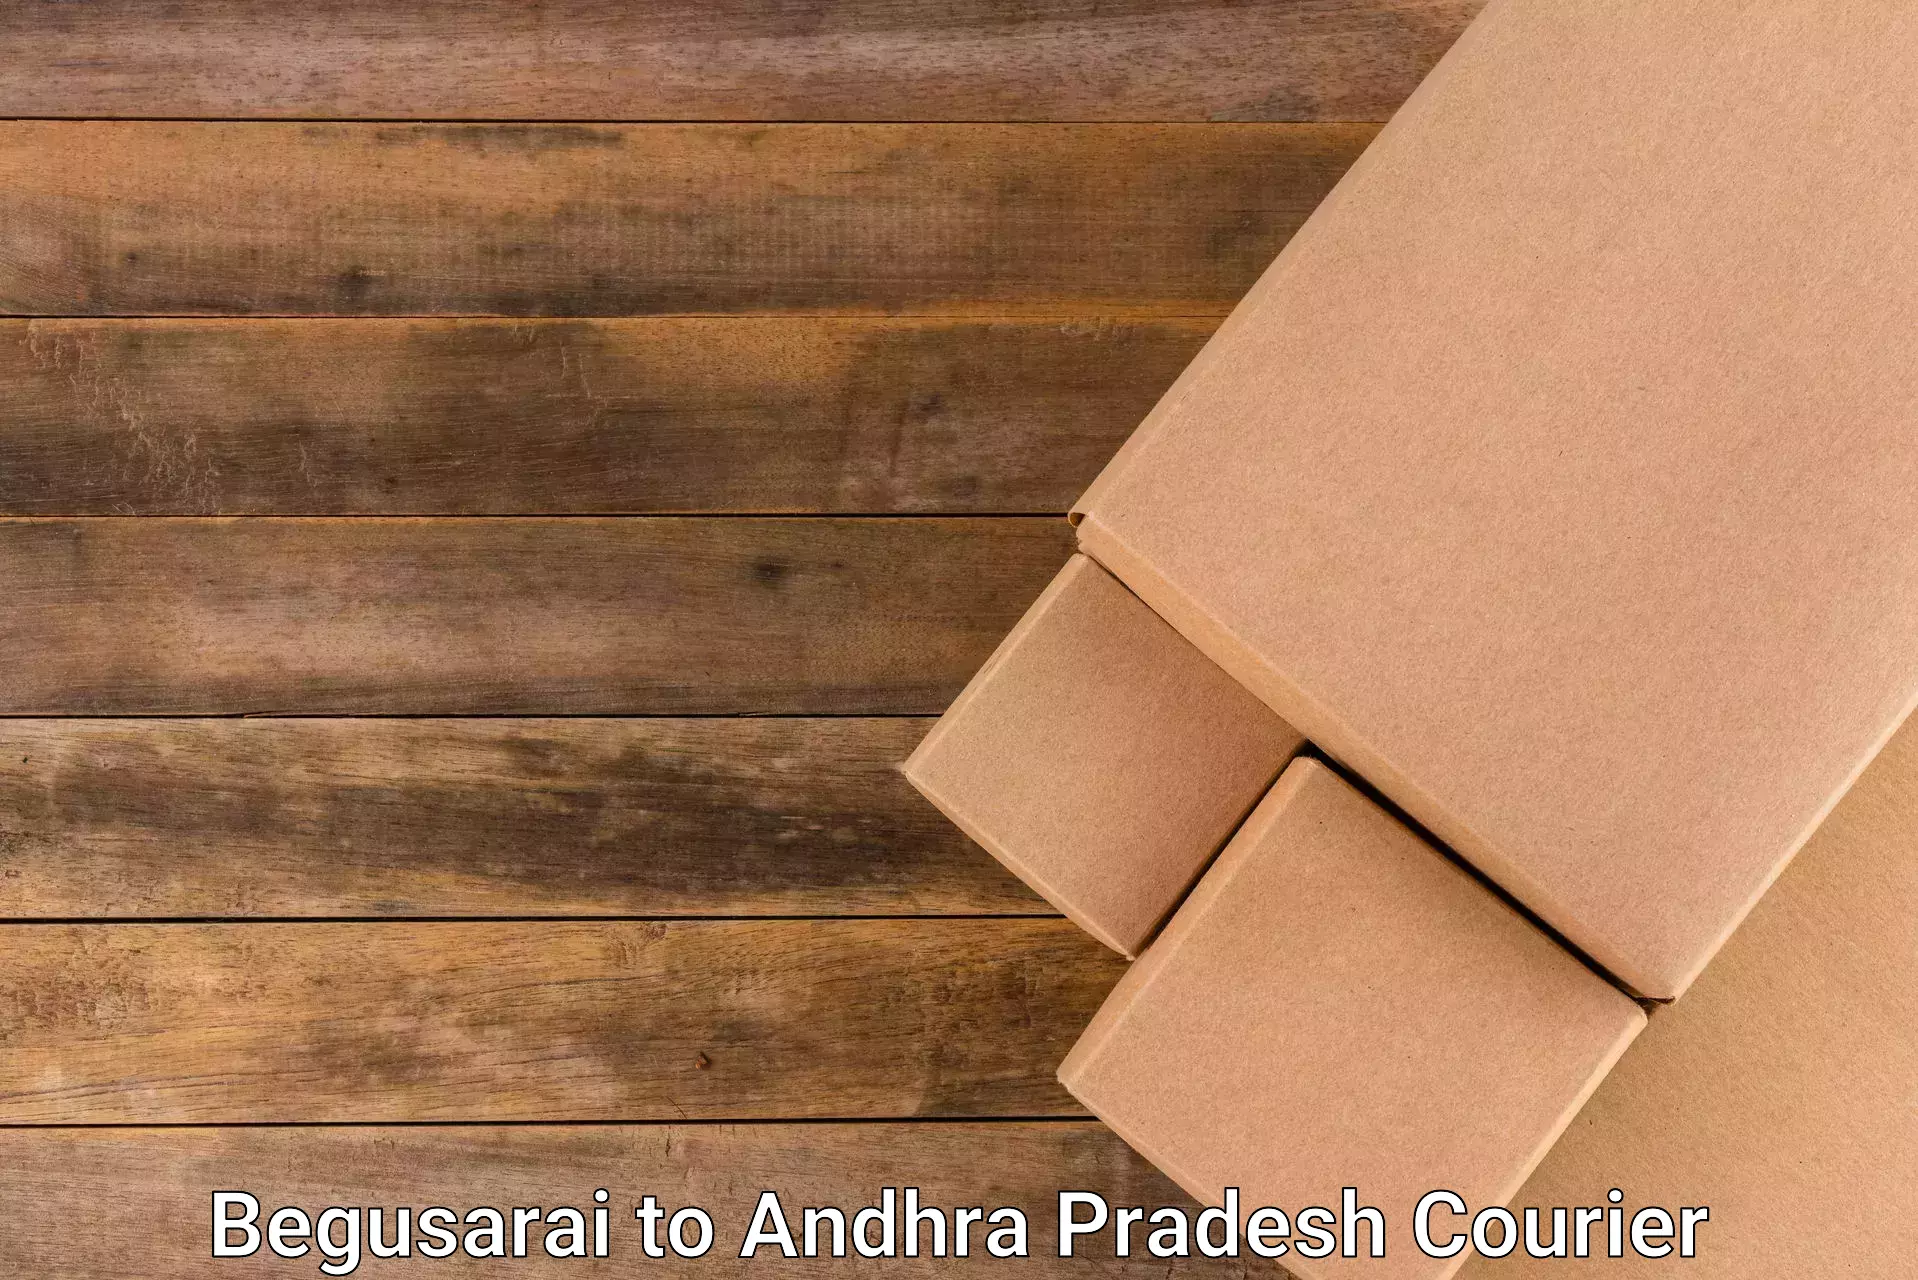 Courier service innovation in Begusarai to Tirupati